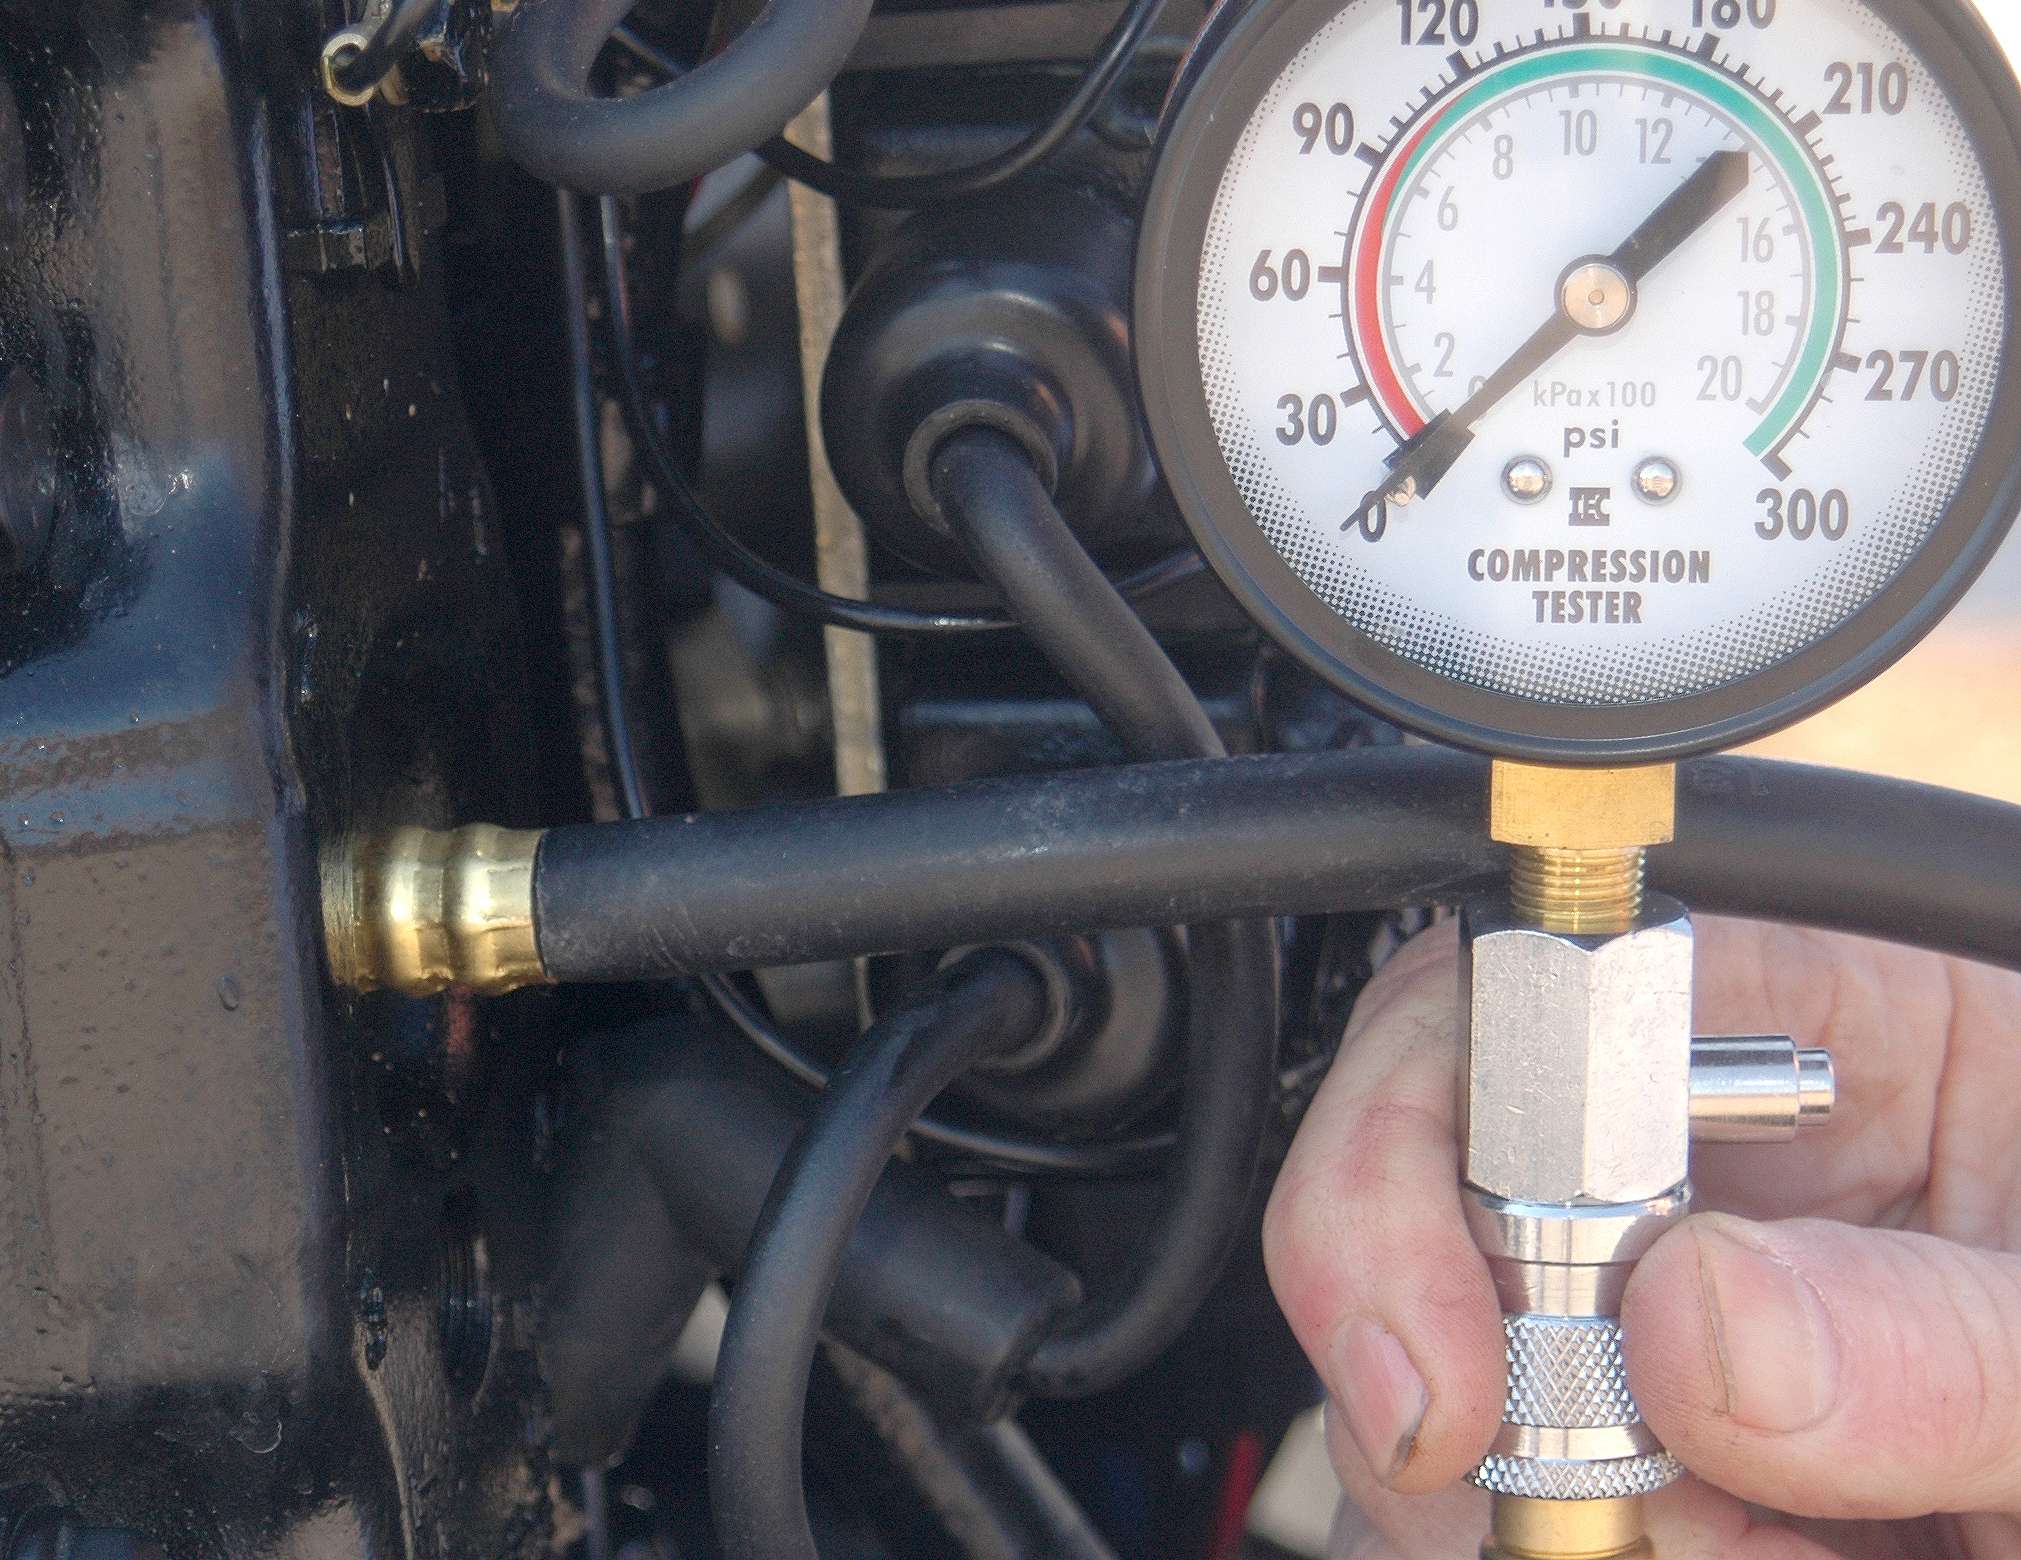 Screw the compression tester into the spark plug hole. Disconnect the kill switch or the ignition battery so the engine can't start. Then turn the engine over for three to four seconds.